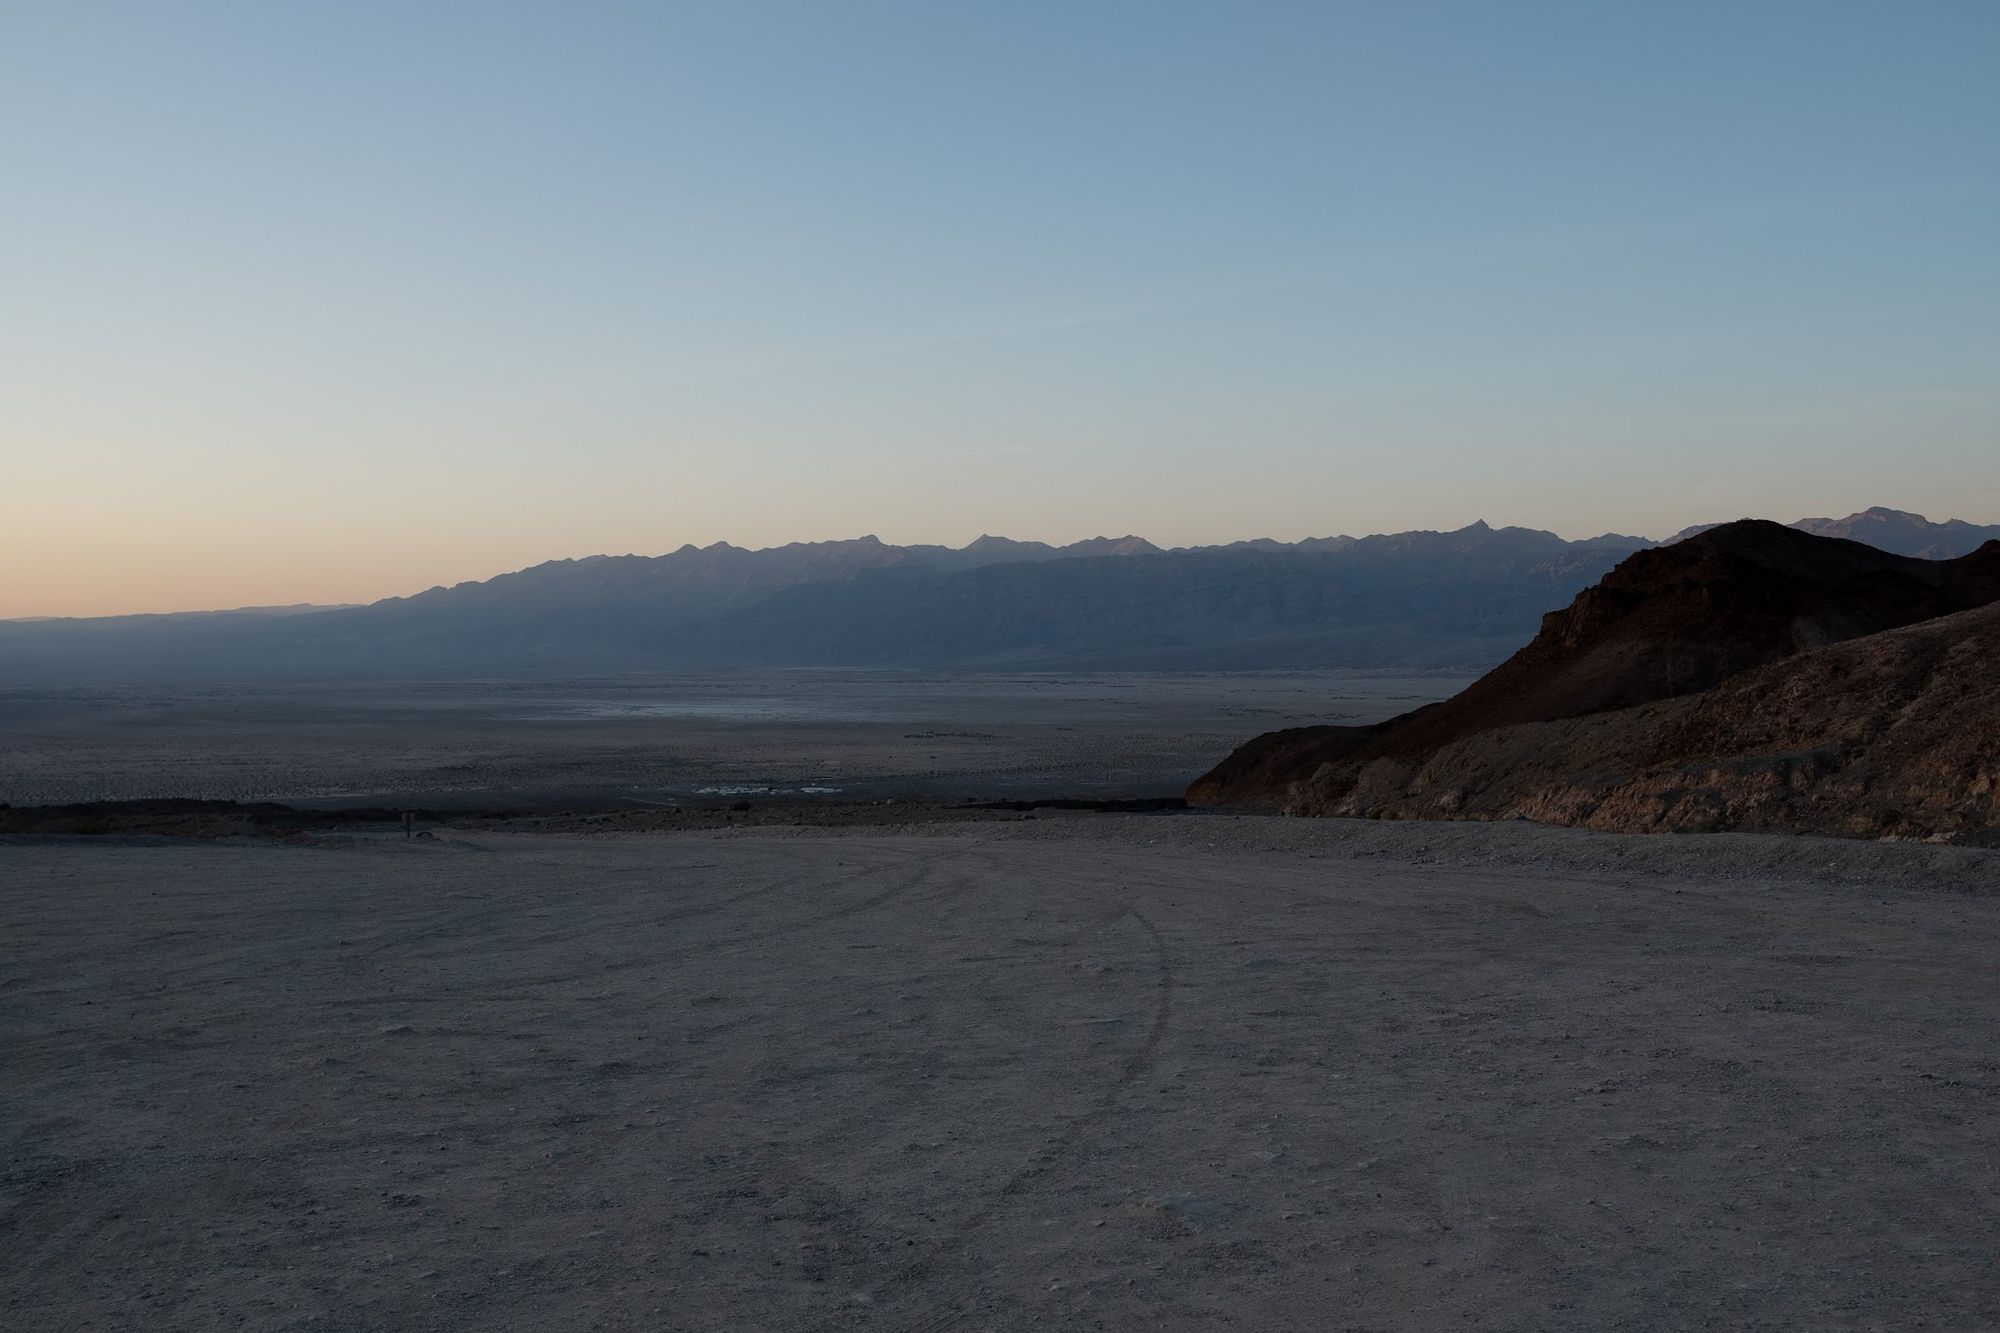 Flat landscape at sunset, taken from a bare dirt parking lot. Mountains in the background fade into the sunset